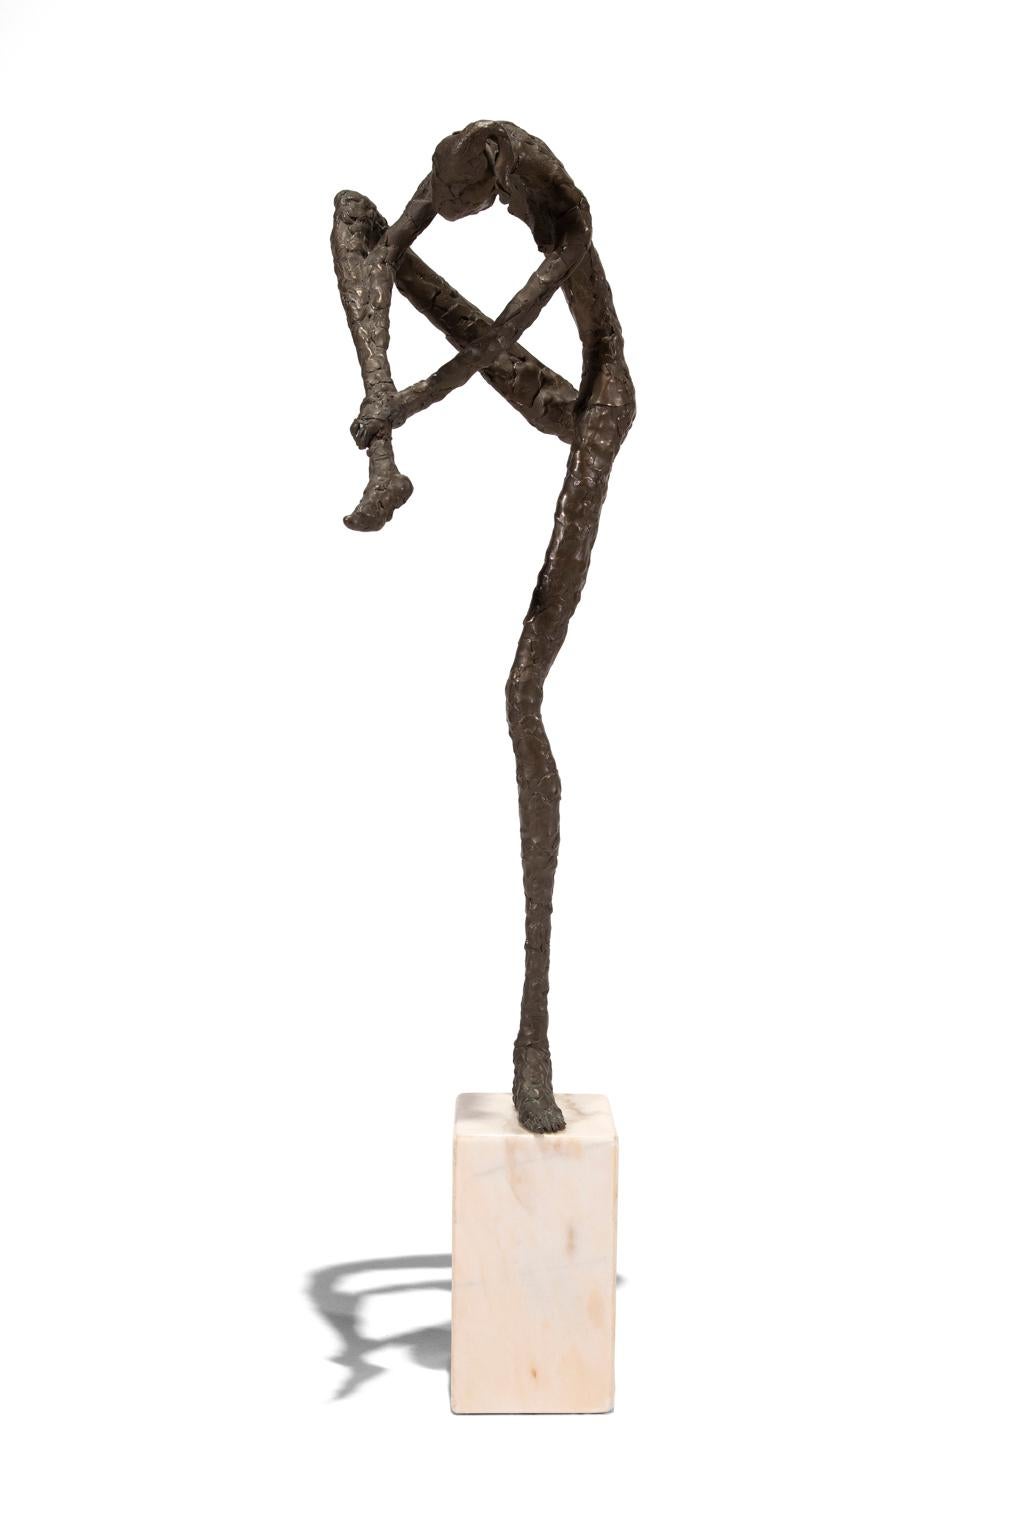 Titled “Ballerina” this sculpture captures the balance and dexterity dancers have in order to perform their beautiful and inspiring performances. Like some of Edgar Degas' ballerinas in the late 19th century, Tom Brun has captured an off moment when